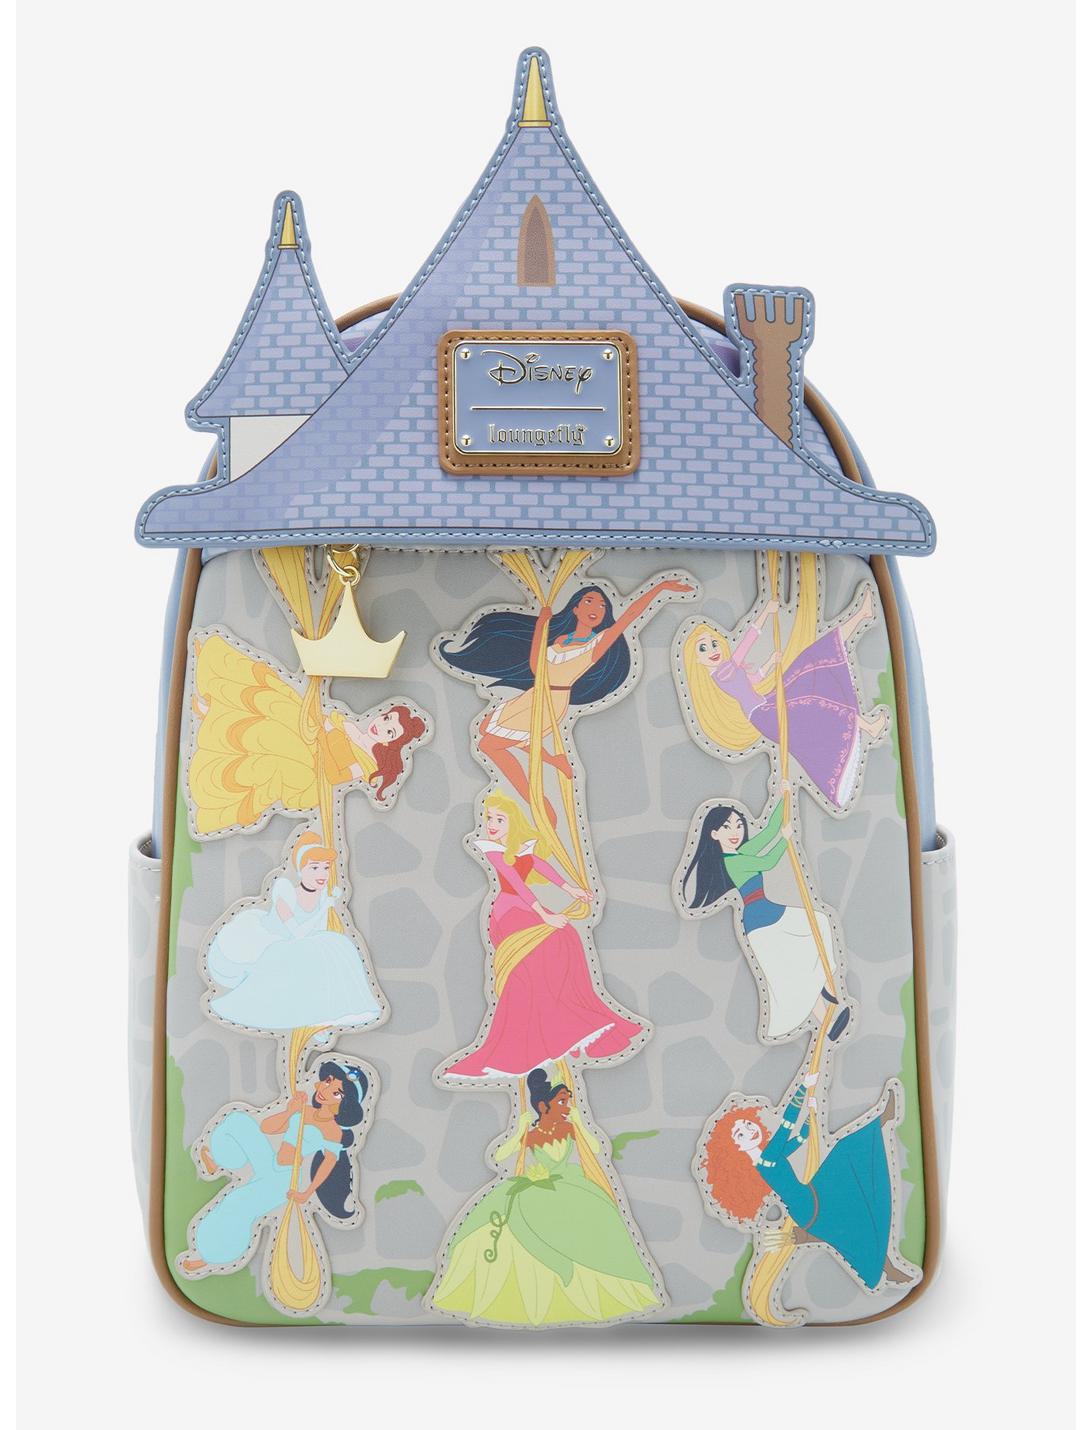 Loungefly Disney Princess Climbing Castle Mini Backpack - BoxLunch Exclusive, , hi-res